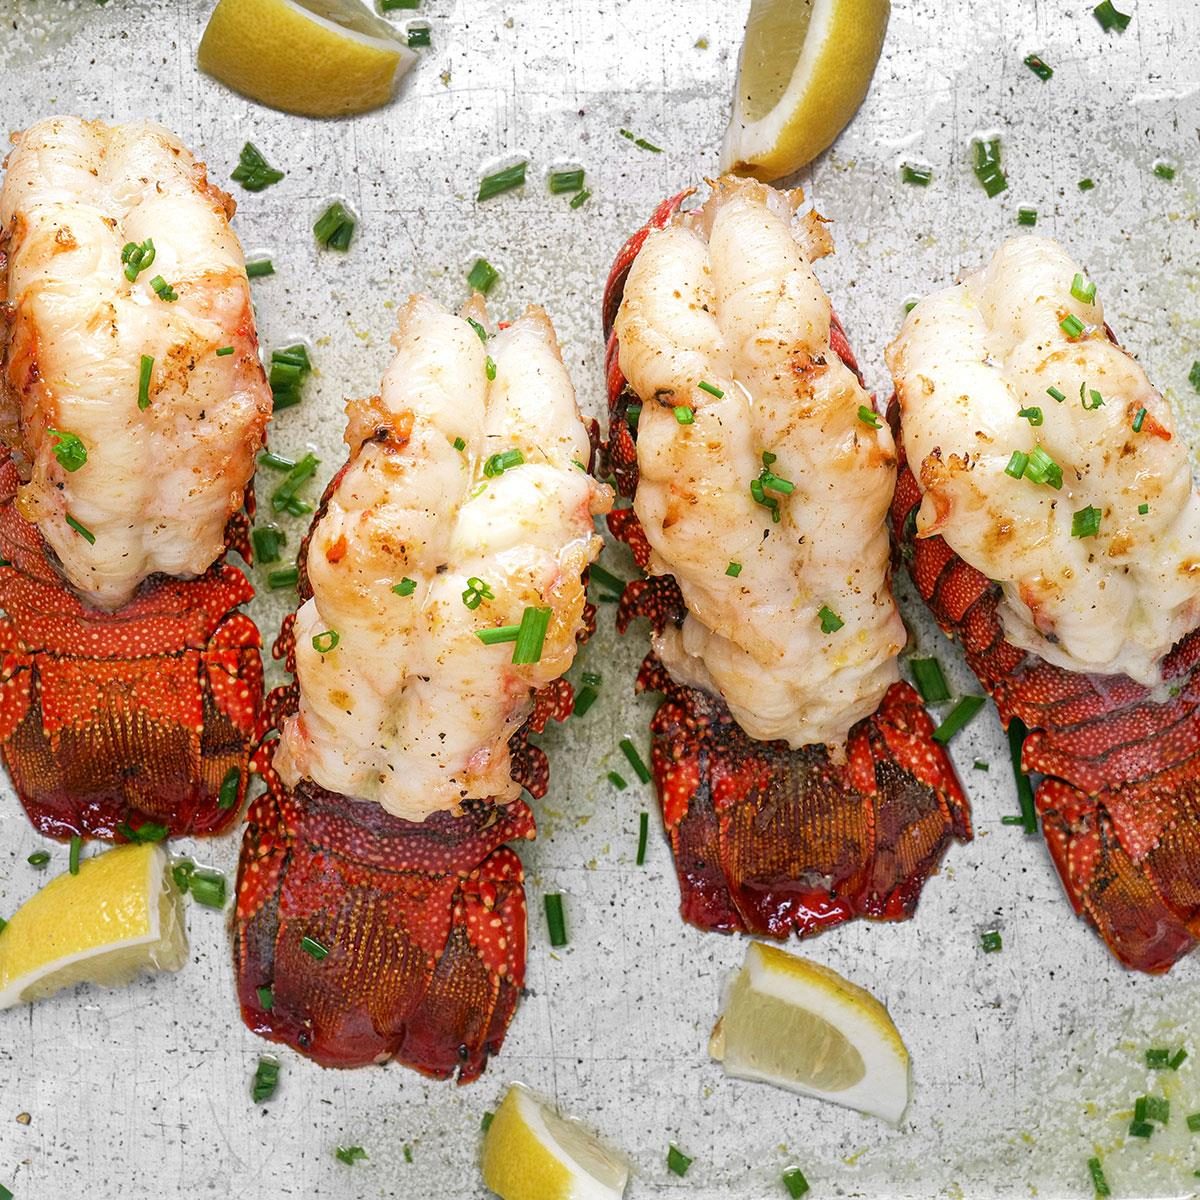 Broiled Lobster Tail Exps Tohvp23 199655 Mf 12 14 Broiledlobstertail 1